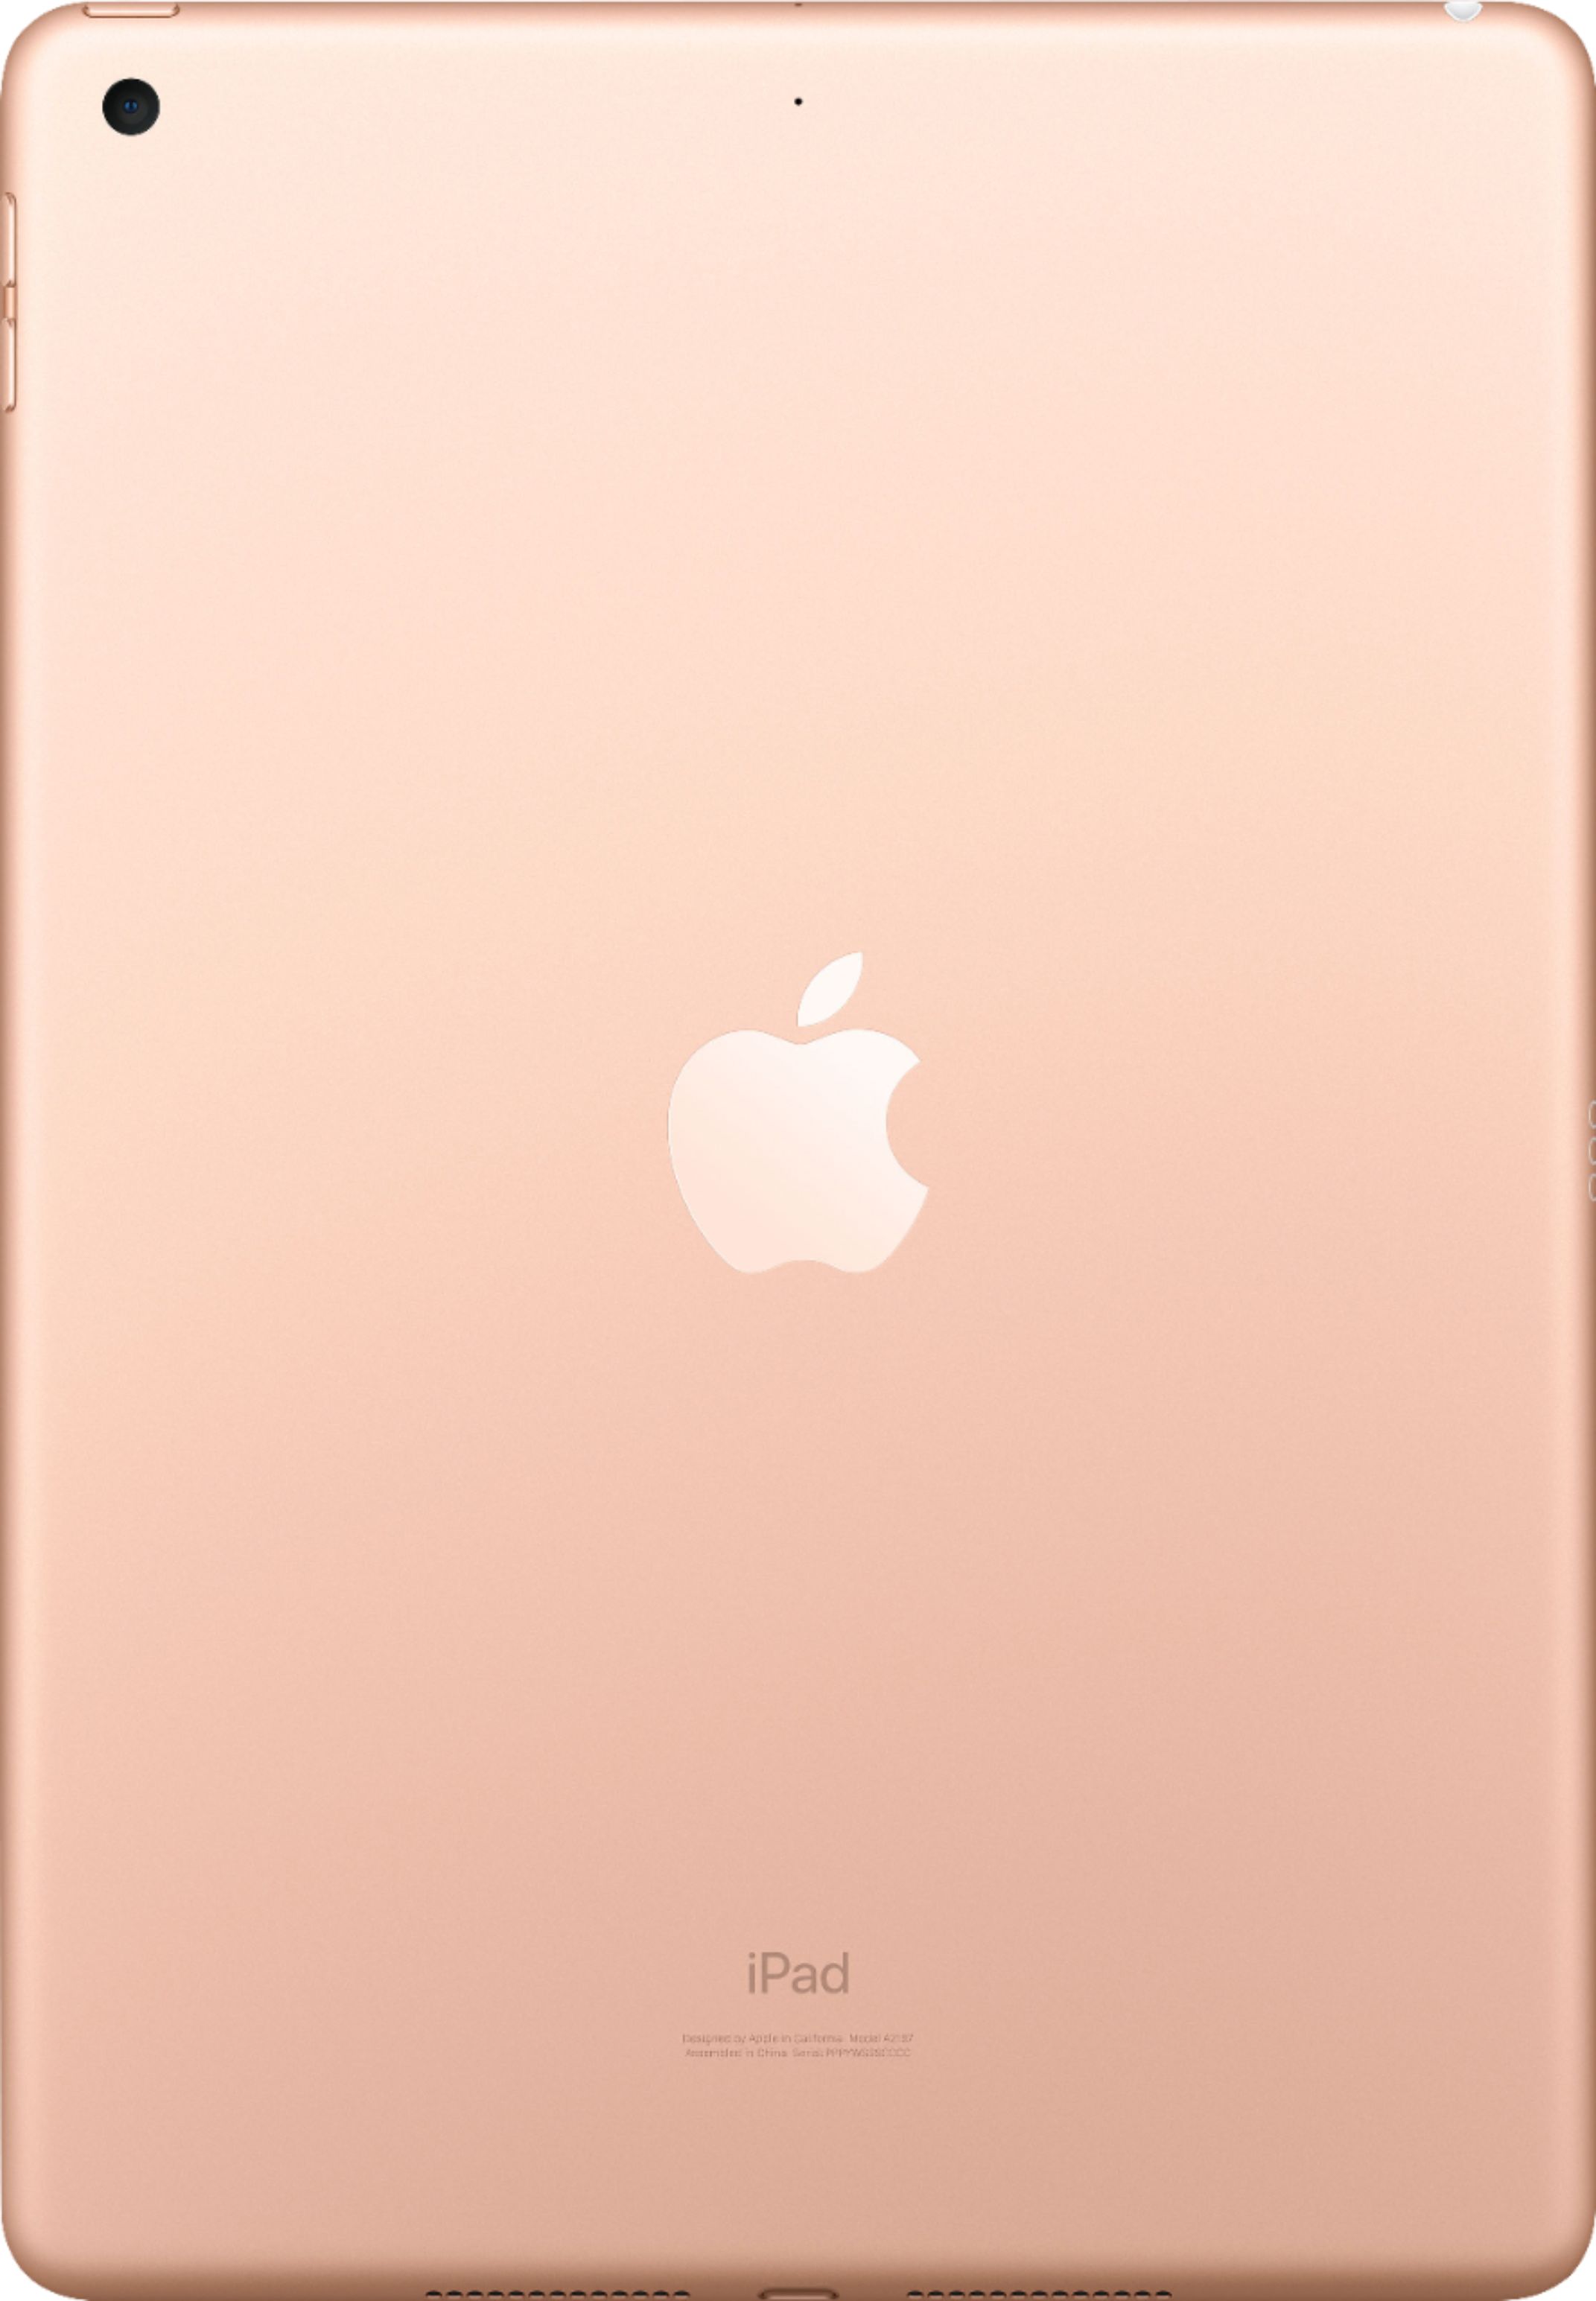 Back View: Apple - 10.2-Inch iPad (Latest Model) with Wi-Fi + Cellular - 64GB - Silver (AT&T)